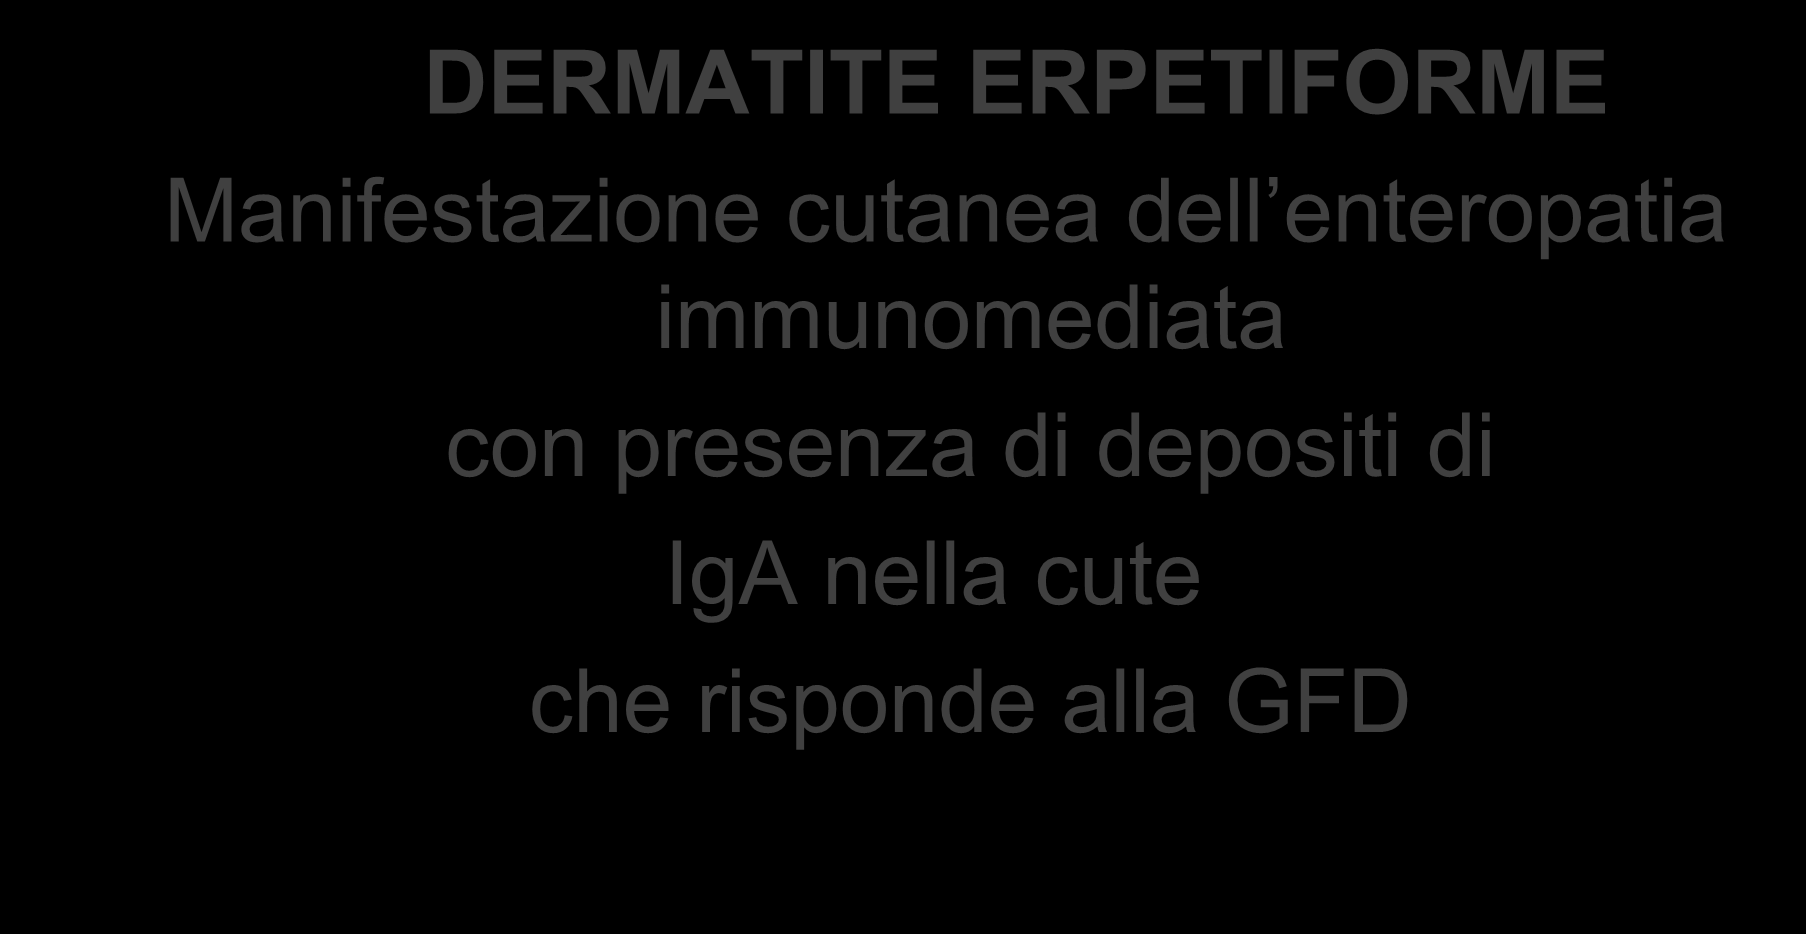 OSLO definitions for celiac disease and related terms DERMATITE ERPETIFORME Manifestazione